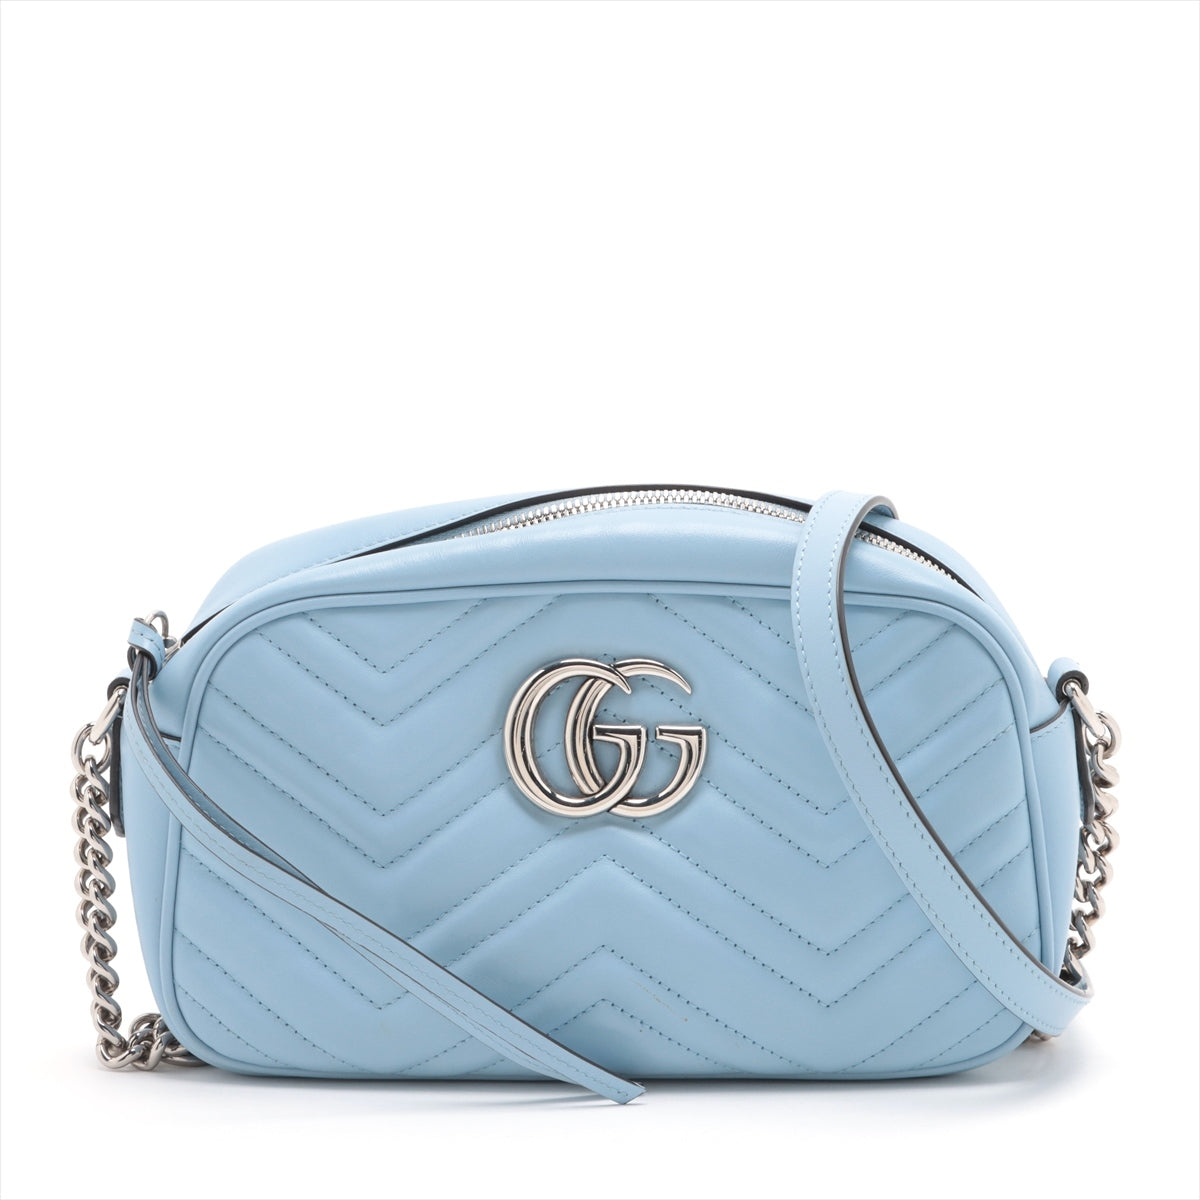 Gucci GG Marmont Leather Chain shoulder bag Blue 447632   Kobalame attached to the root